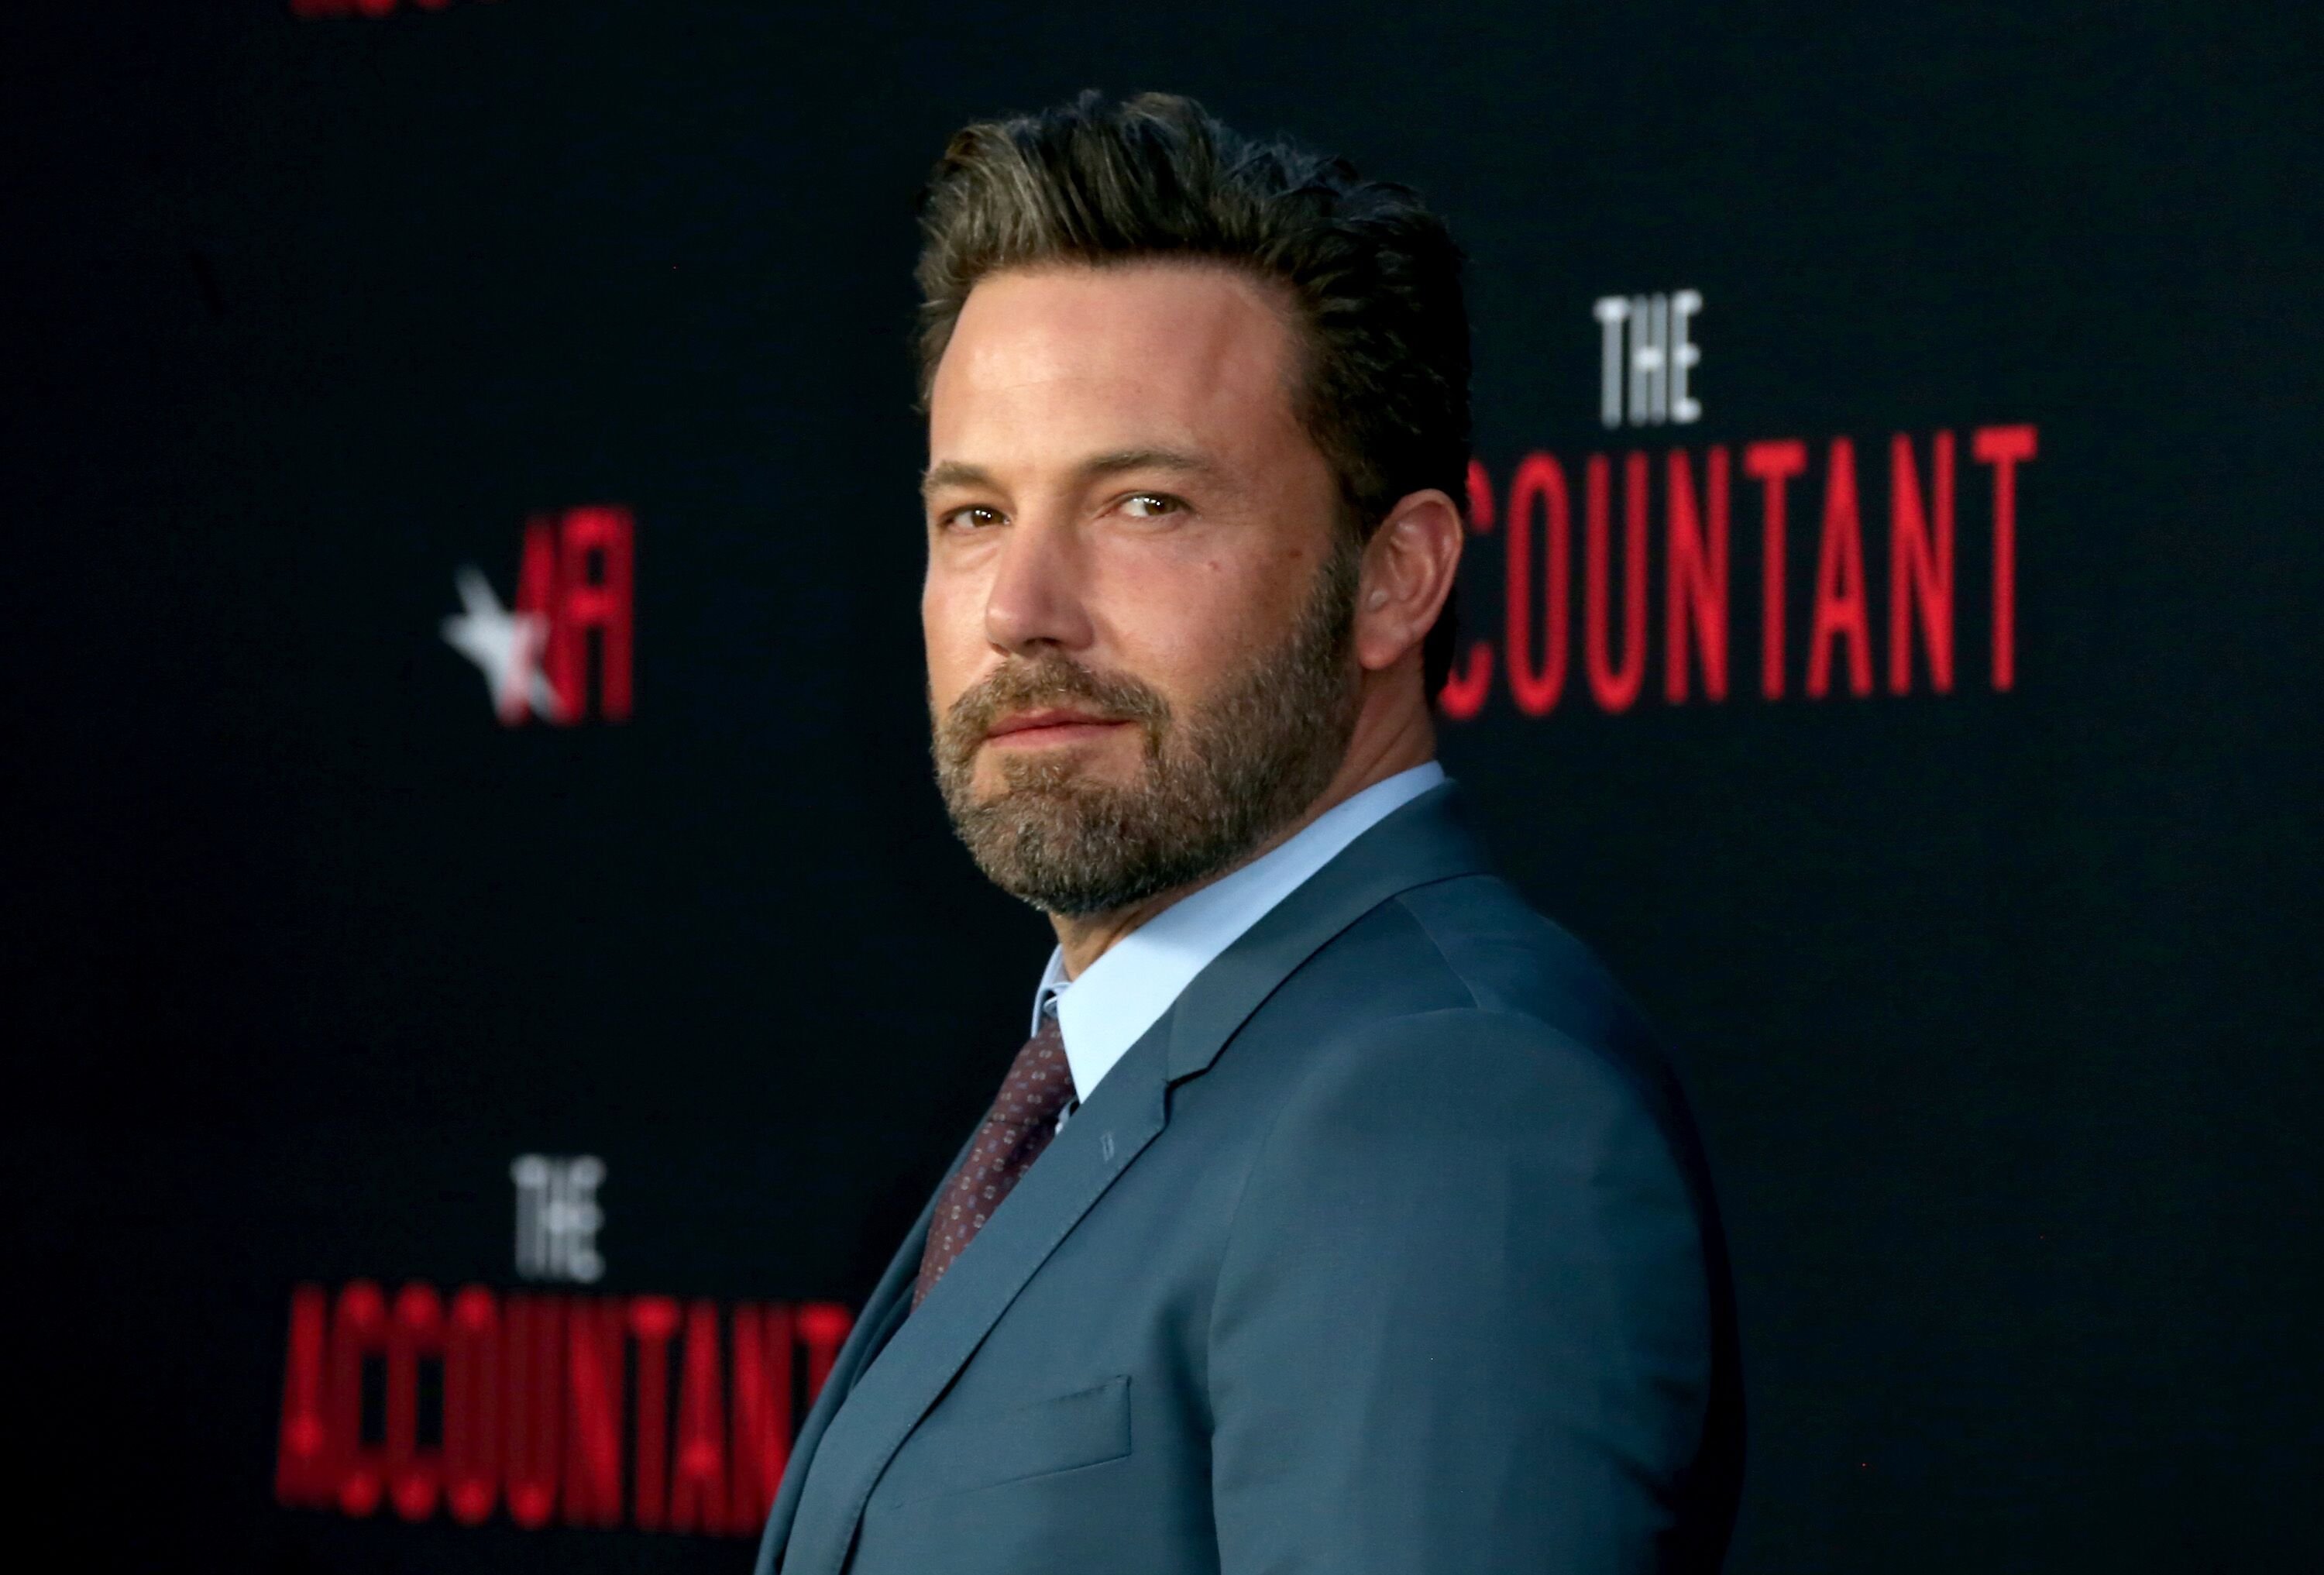 Actor Ben Affleck attends the premiere of Warner Bros Pictures' "The Accountant" at TCL Chinese Theatre on October 10, 2016 | Photo: Getty Images